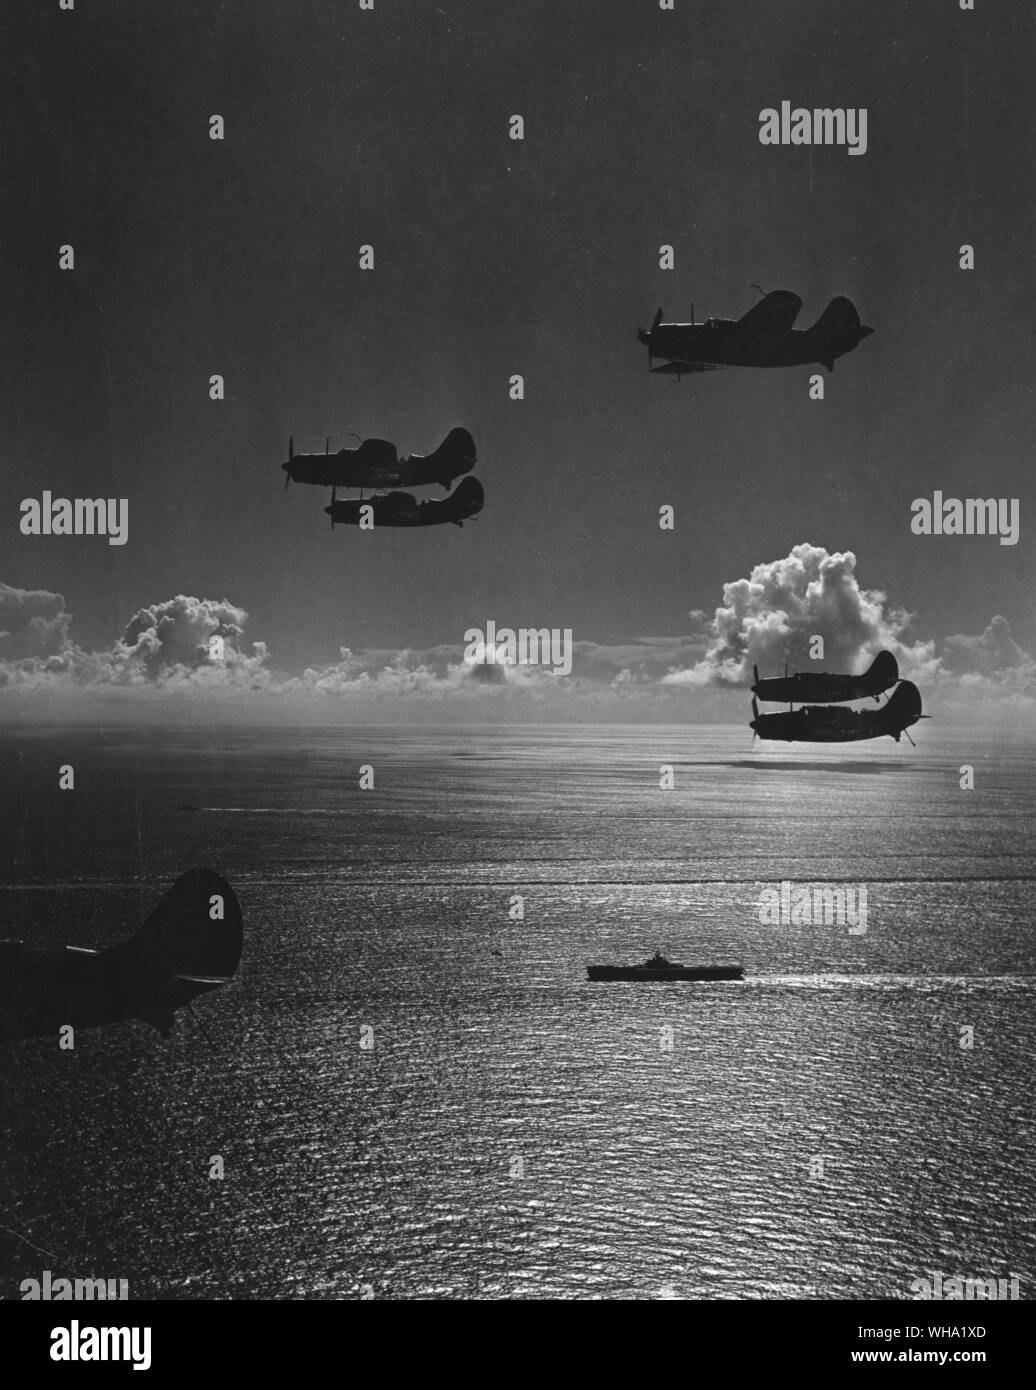 WW2: Silhouettes of SB2C S returning to a carrier of task force 58.1 from a bombing mission over Chicha-Jima in Bonin Islands. 600 miles south of Tokyo. Pacific warfare. Stock Photo